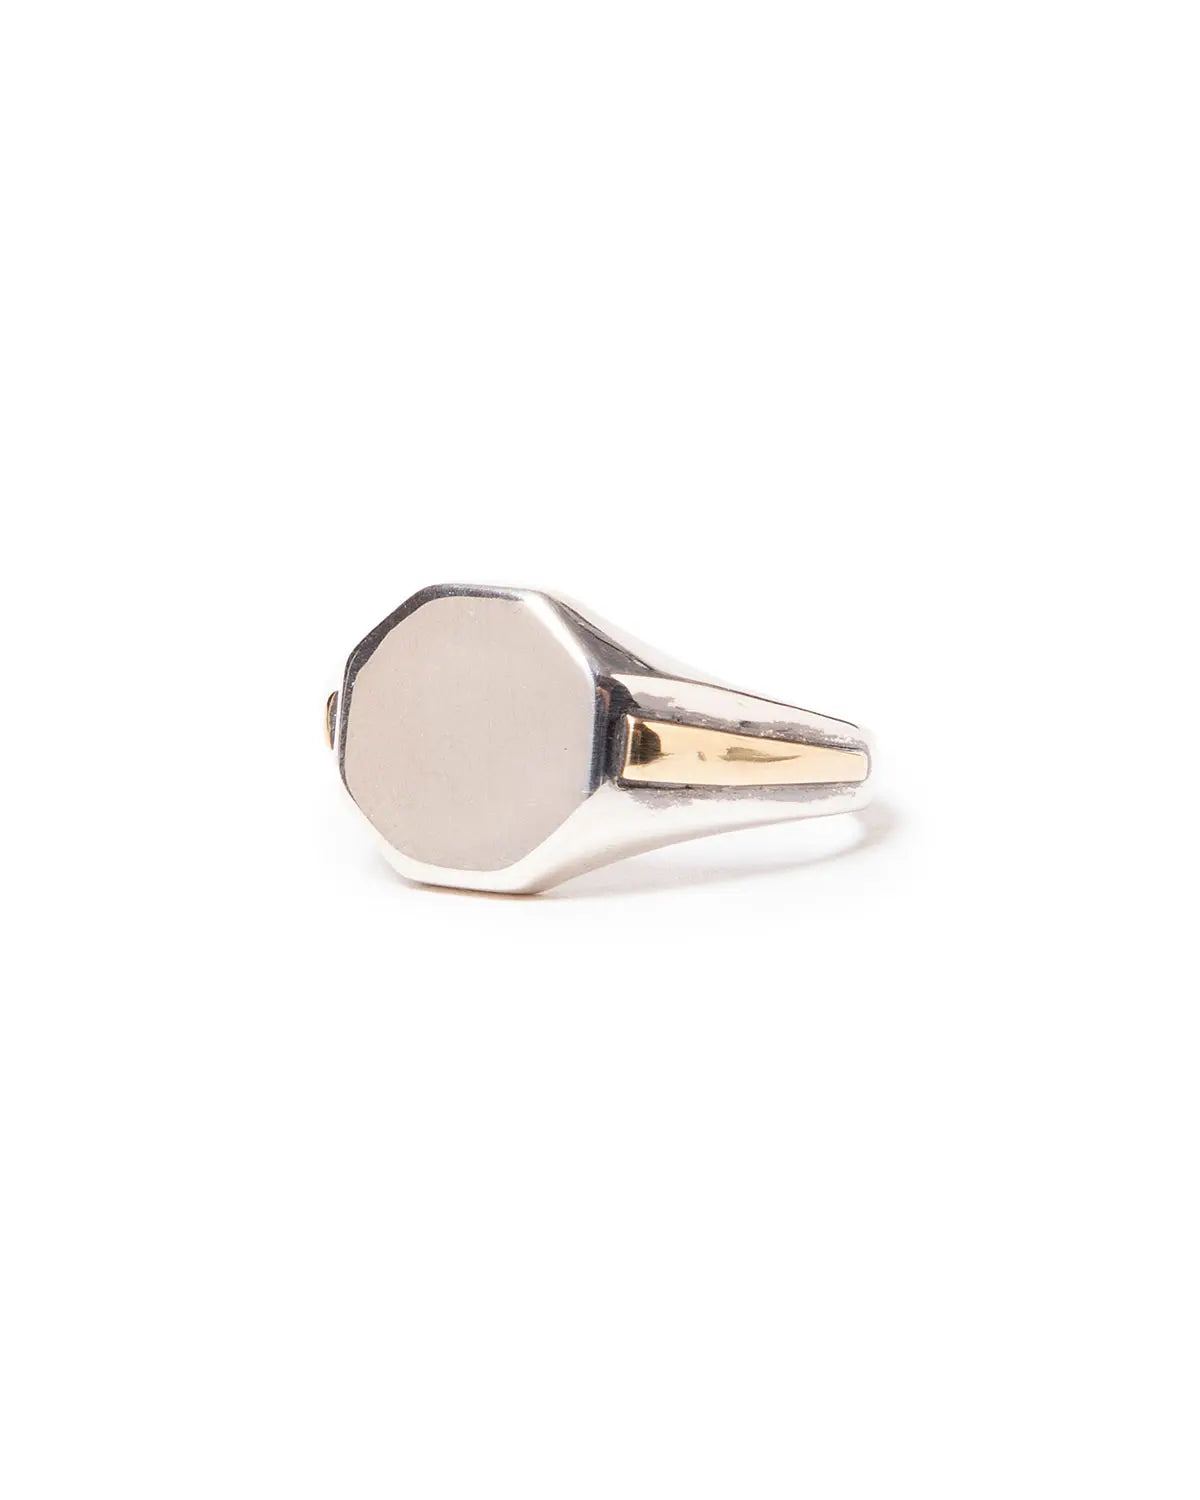 Hobo 24AW SIGNET RING 925 SILVER with BRASS